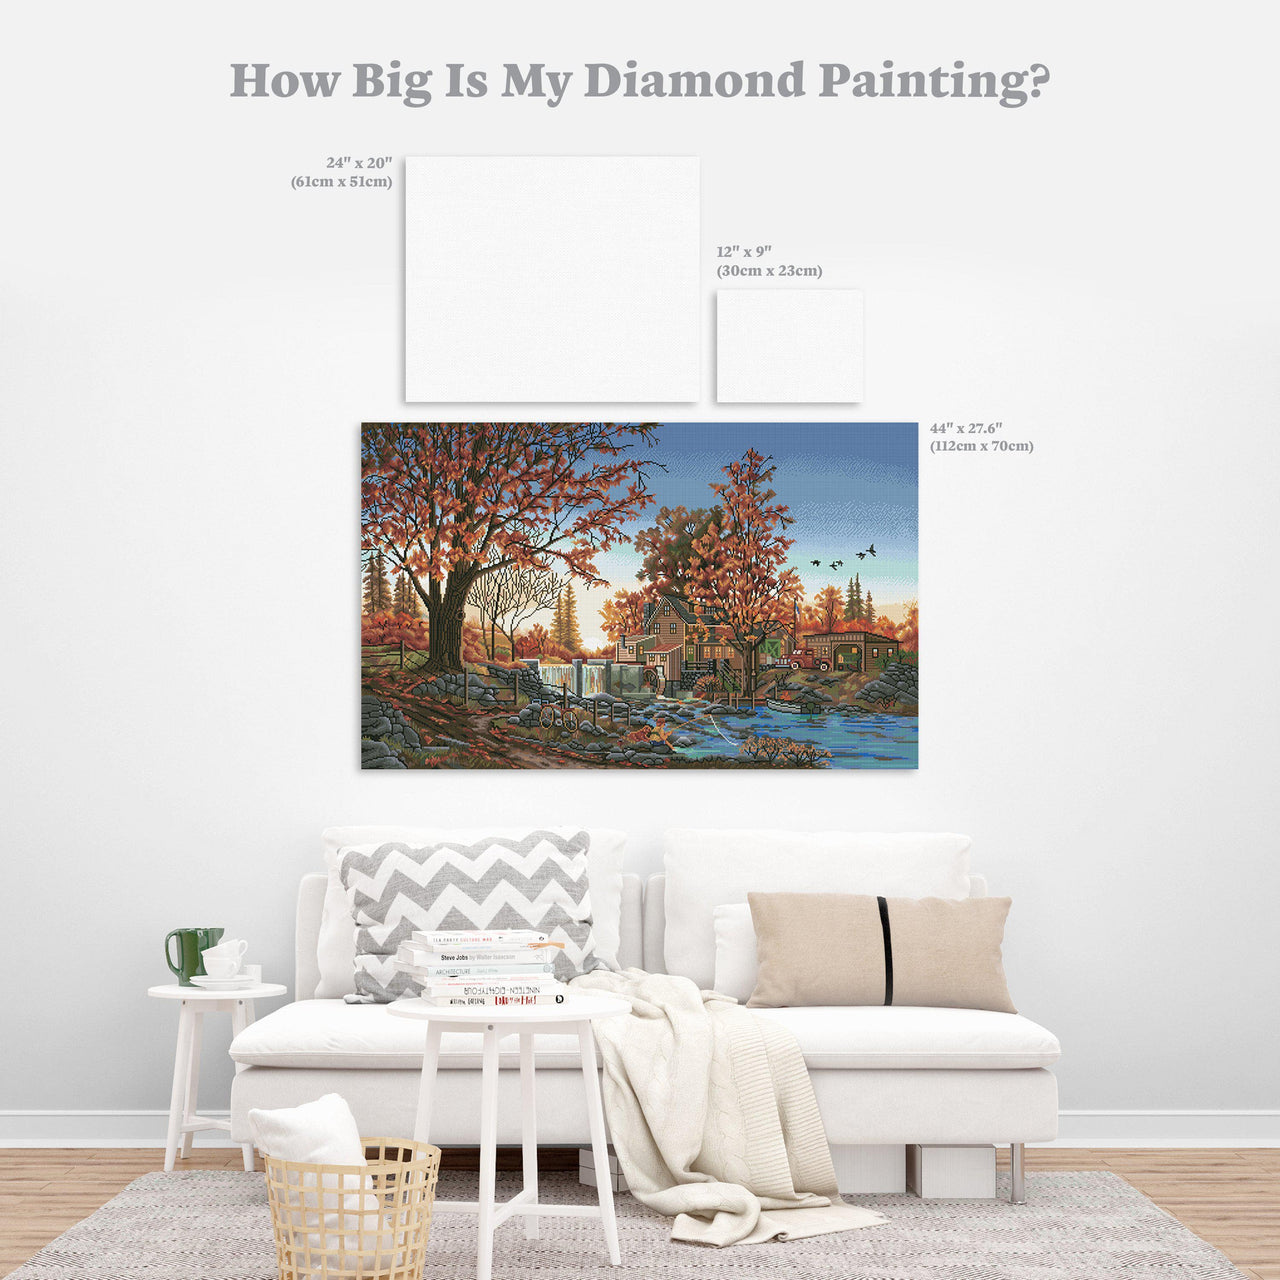 Let see how well this works 🤔  reviews said it works well with Diamond  art. : r/diamondpainting